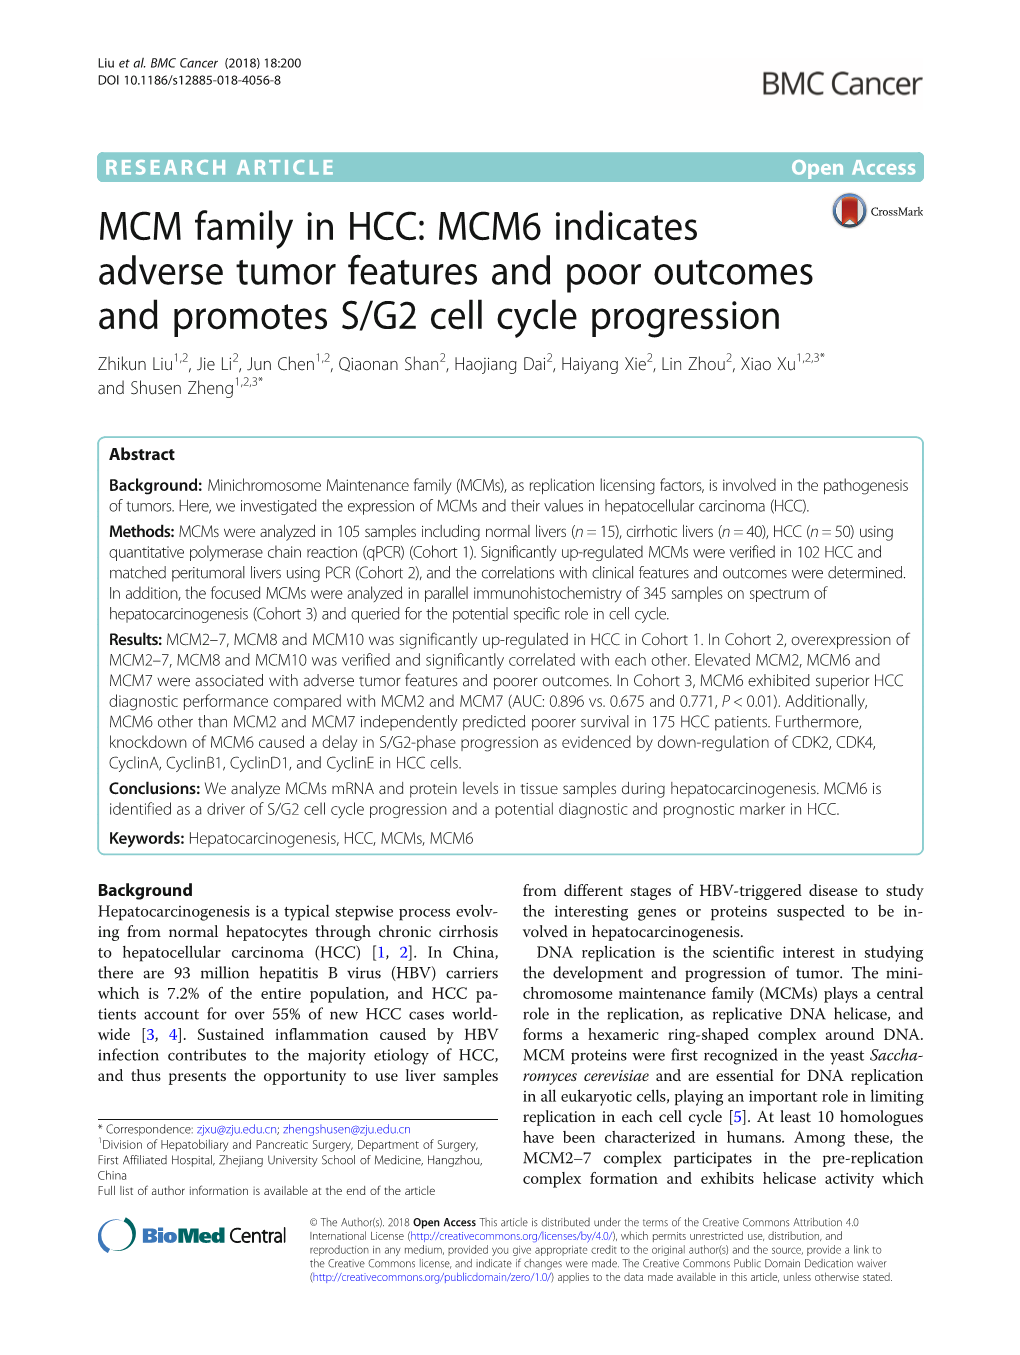 MCM Family in HCC: MCM6 Indicates Adverse Tumor Features and Poor Outcomes and Promotes S/G2 Cell Cycle Progression